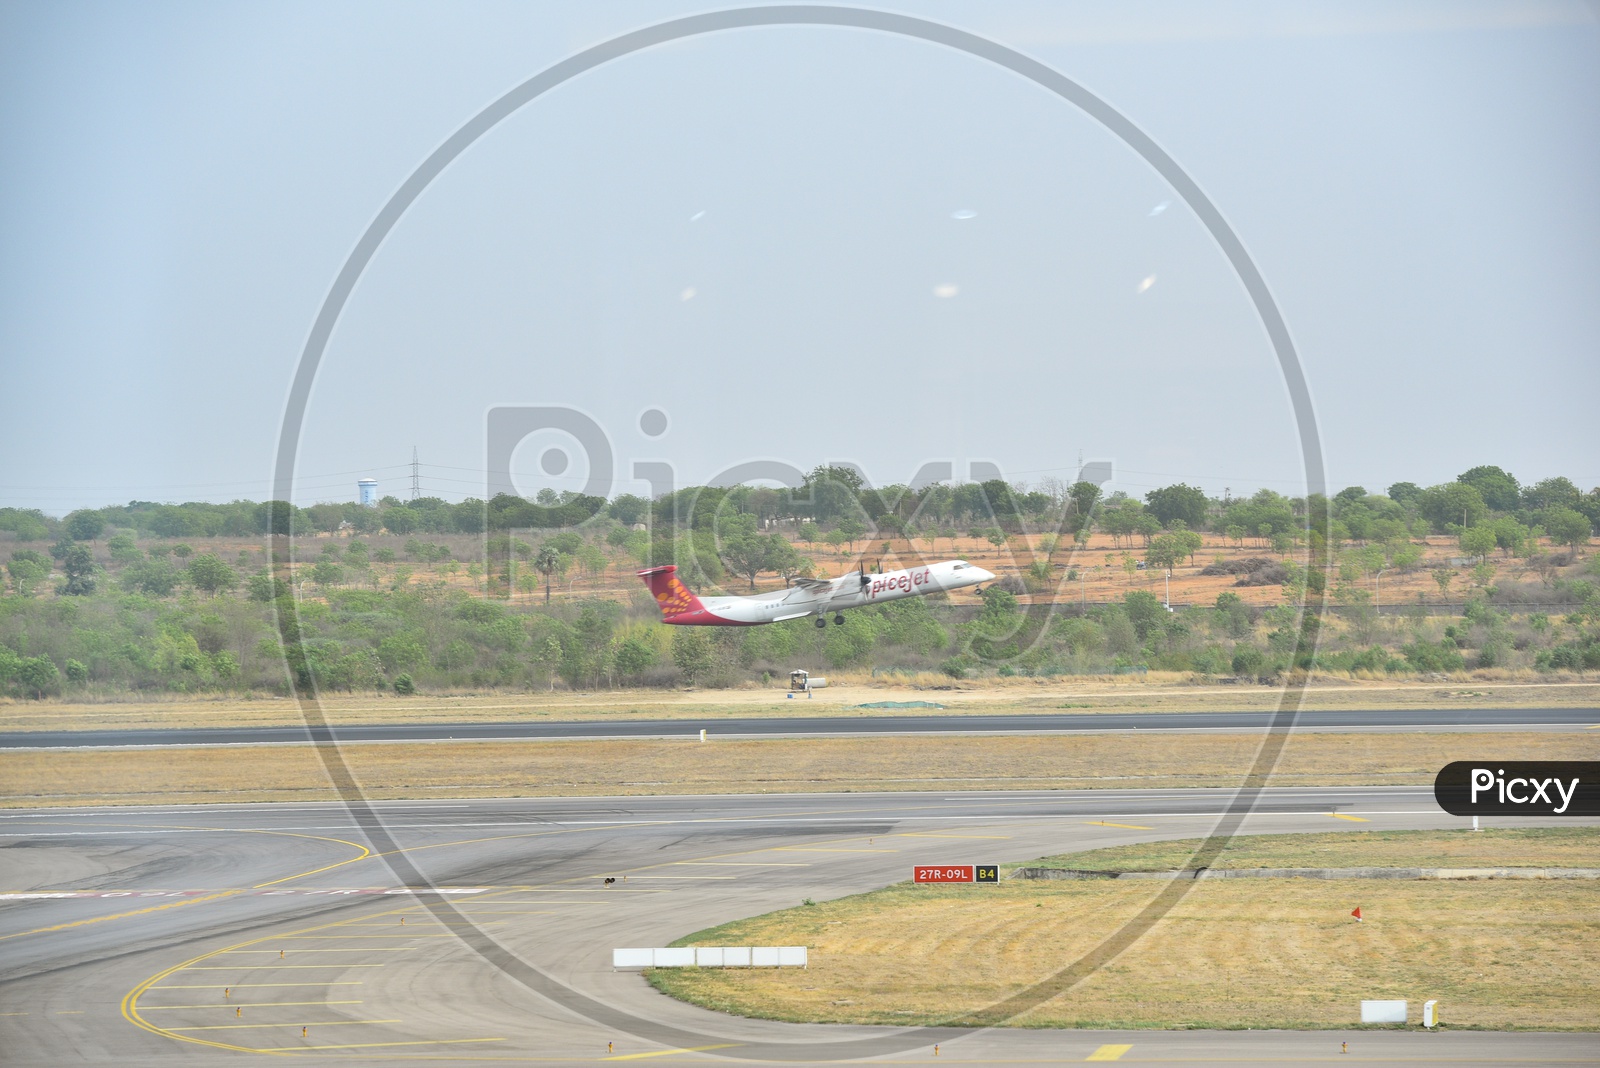 Spicejet  Flight  Taking Off From an Airport